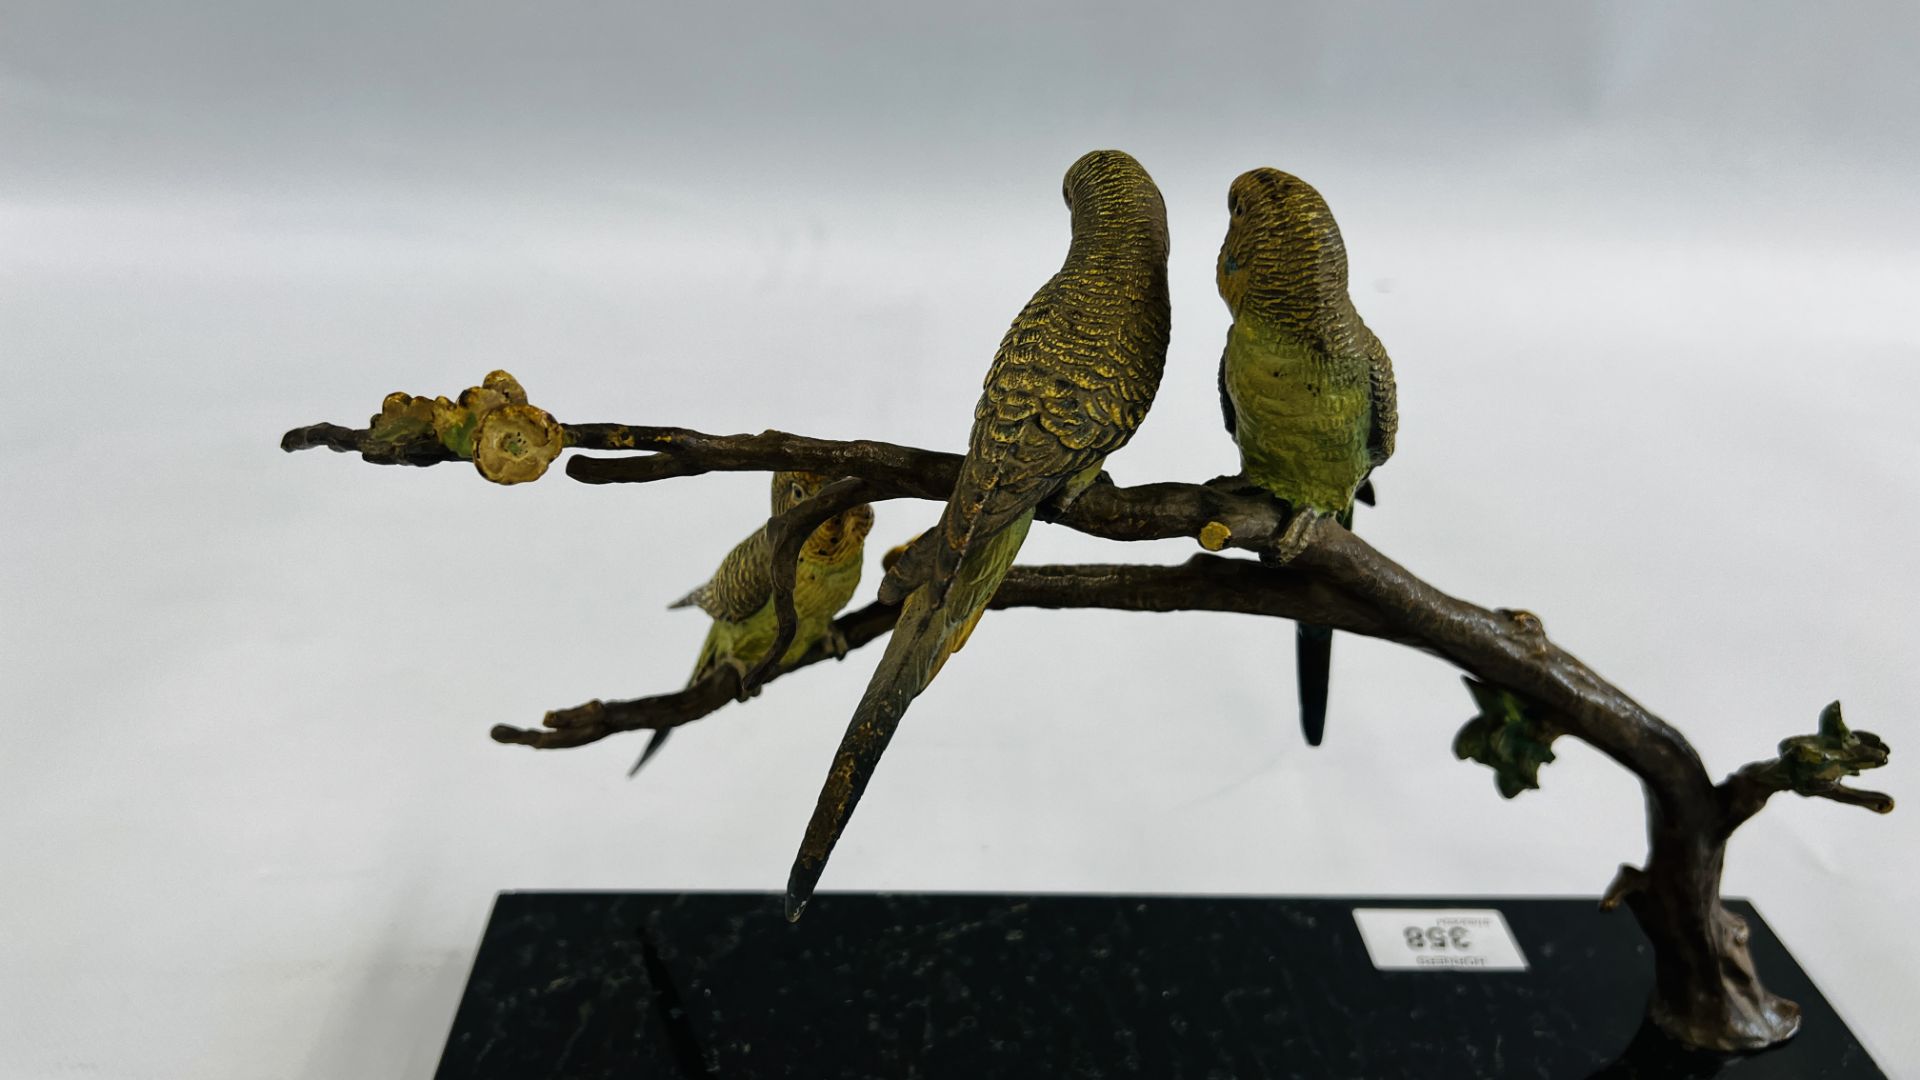 COLD PAINTED BRONZE STUDY OF THREE BUDGERIGARS ON A BLOSSOM BRANCH ON A HARD STONE BASE - L 33CM X - Image 7 of 8